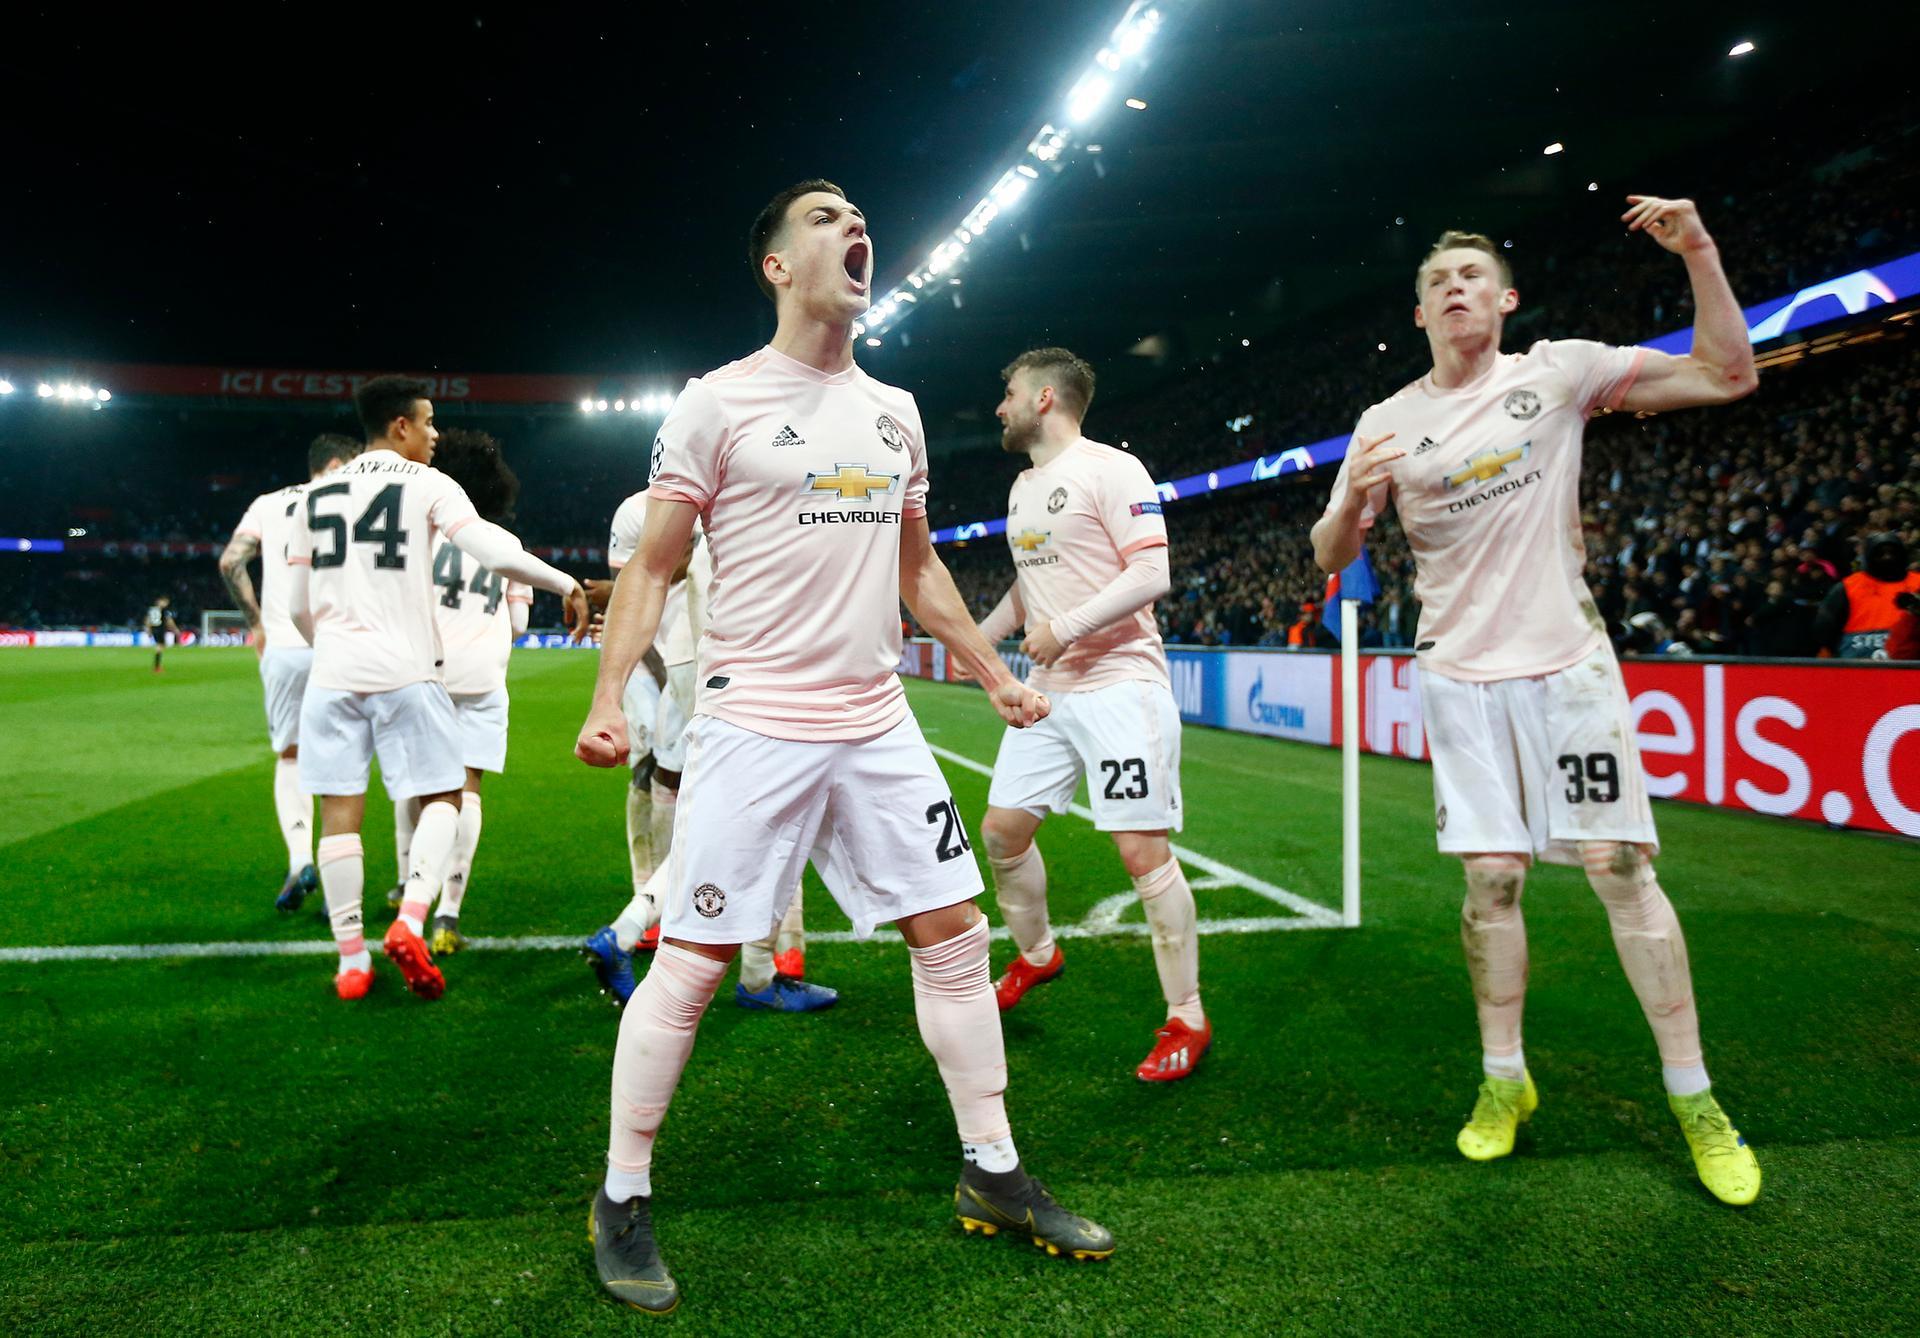 The long read: Faith in Ole Gunnar Solskjaer's leadership still strong one  year after Manchester United's unforgettable win over PSG